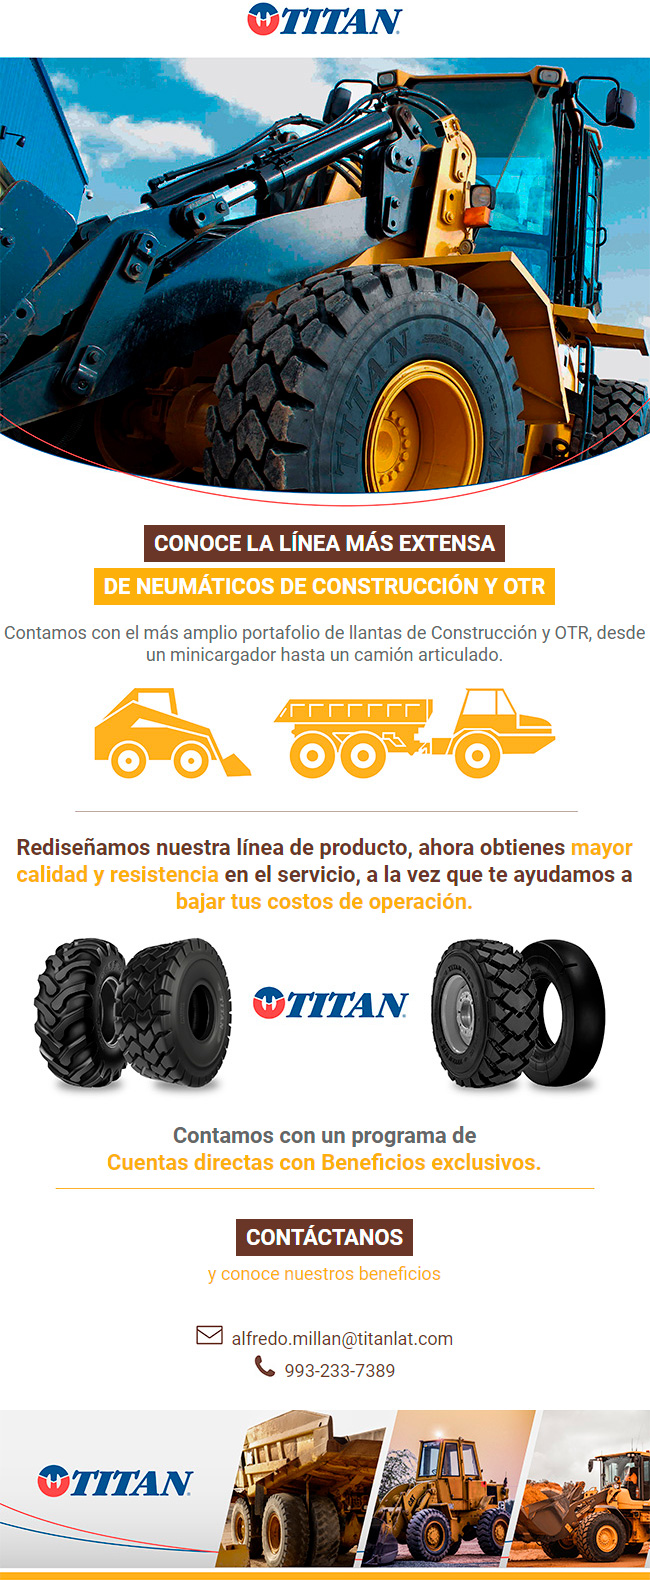 The most extensive line of Construction and OTR Tires. We have the widest portfolio of Construction and OTR tires. We redesigned our product line.